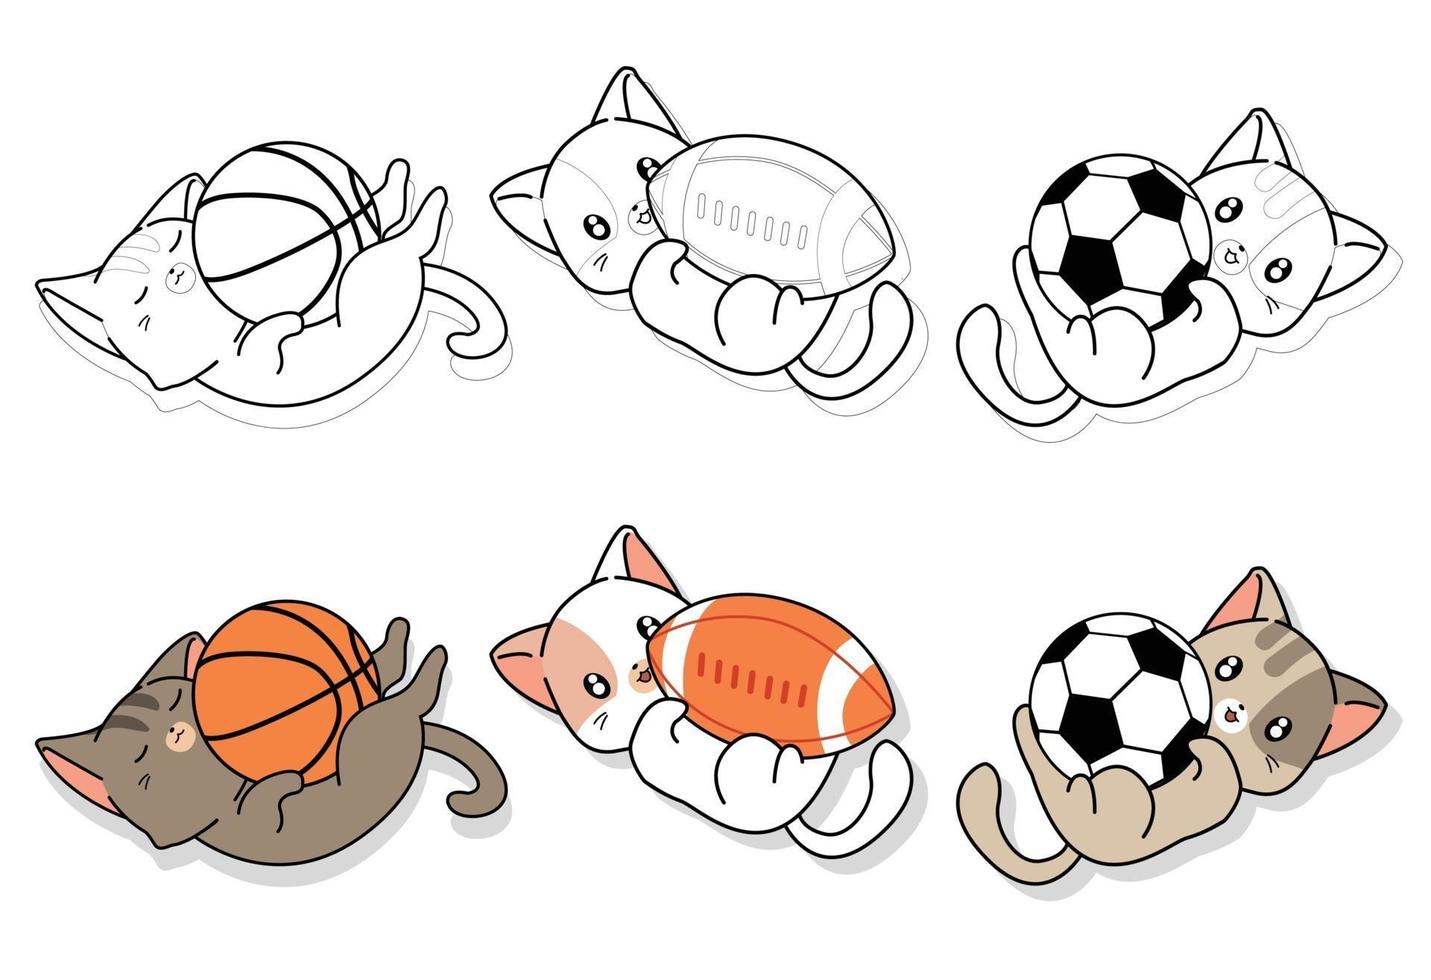 Cute cats and sports equipment cartoon coloring page for kids vector